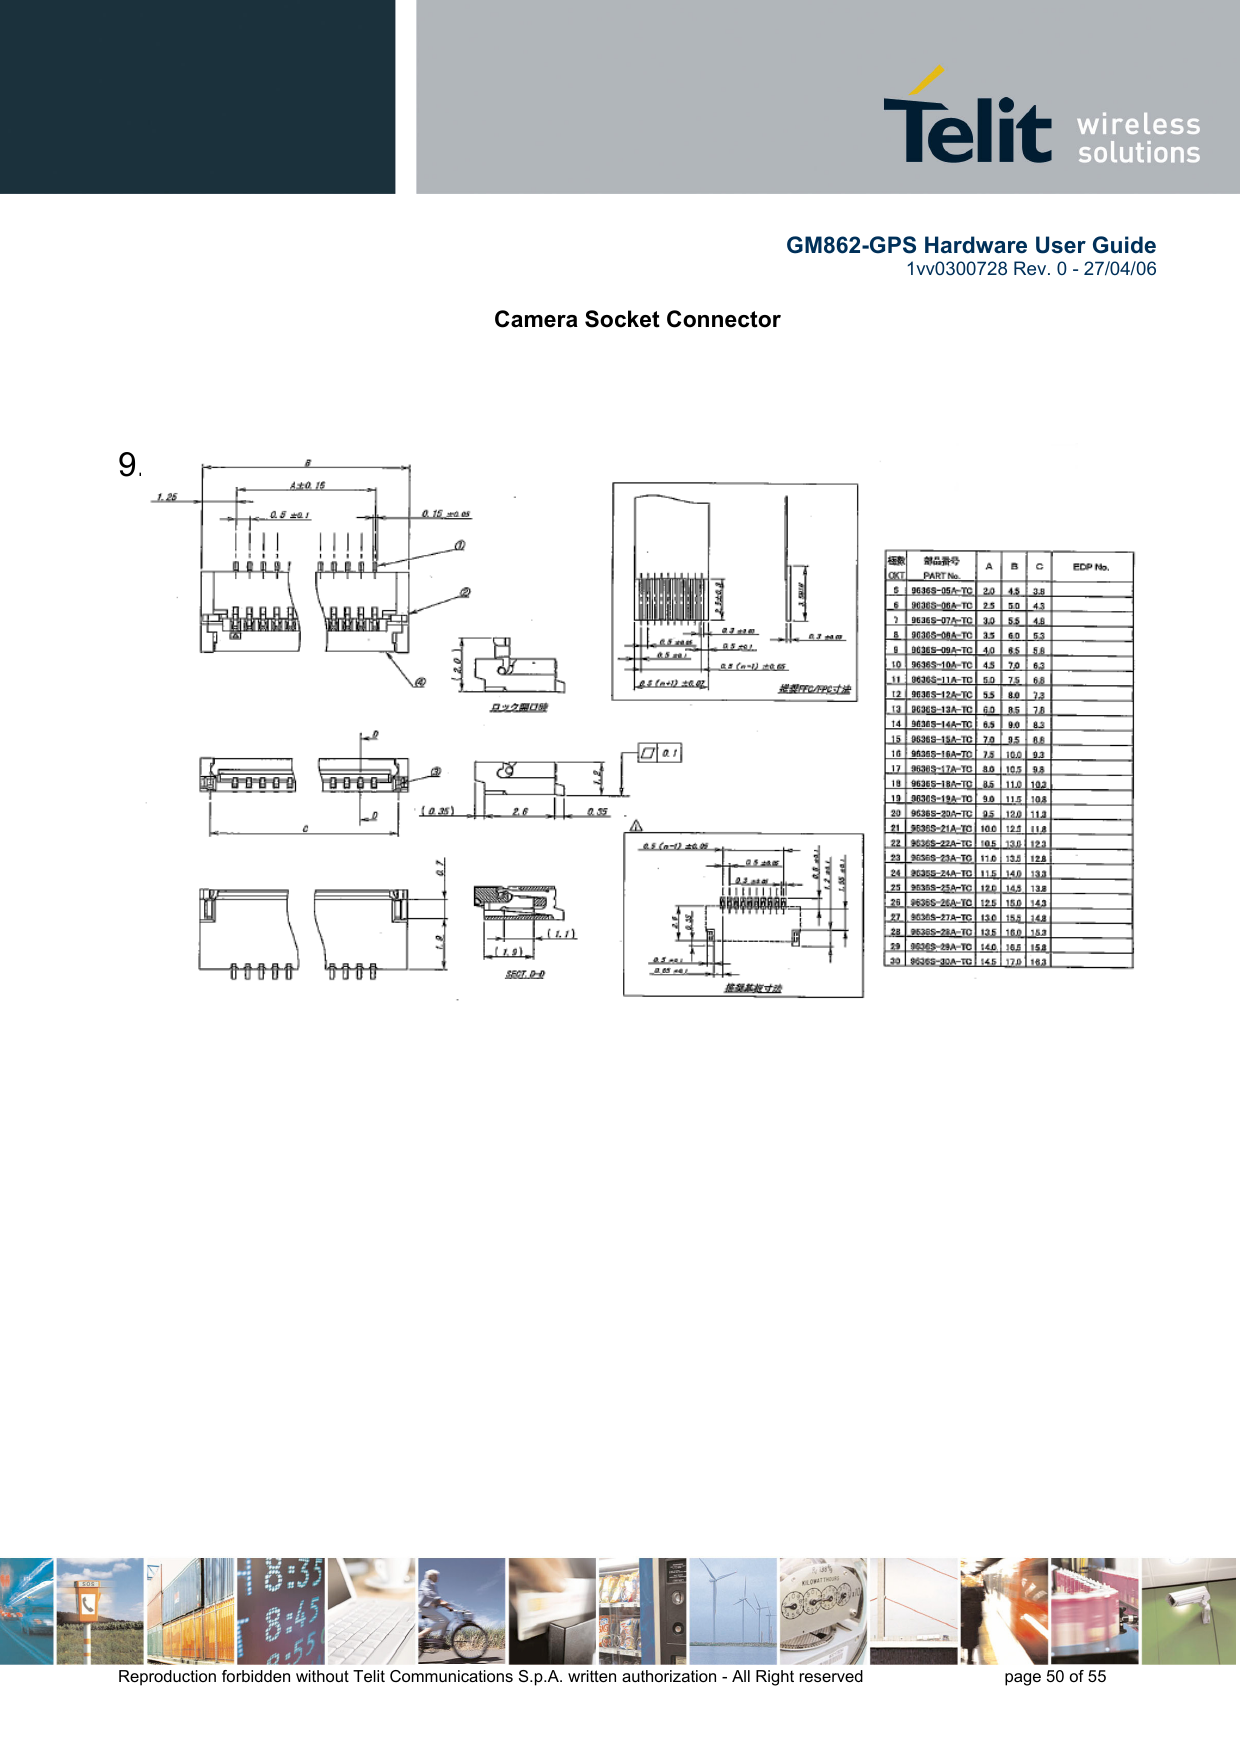        GM862-GPS Hardware User Guide   1vv0300728 Rev. 0 - 27/04/06    Reproduction forbidden without Telit Communications S.p.A. written authorization - All Right reserved    page 50 of 55   Camera Socket Connector  9.1.3 